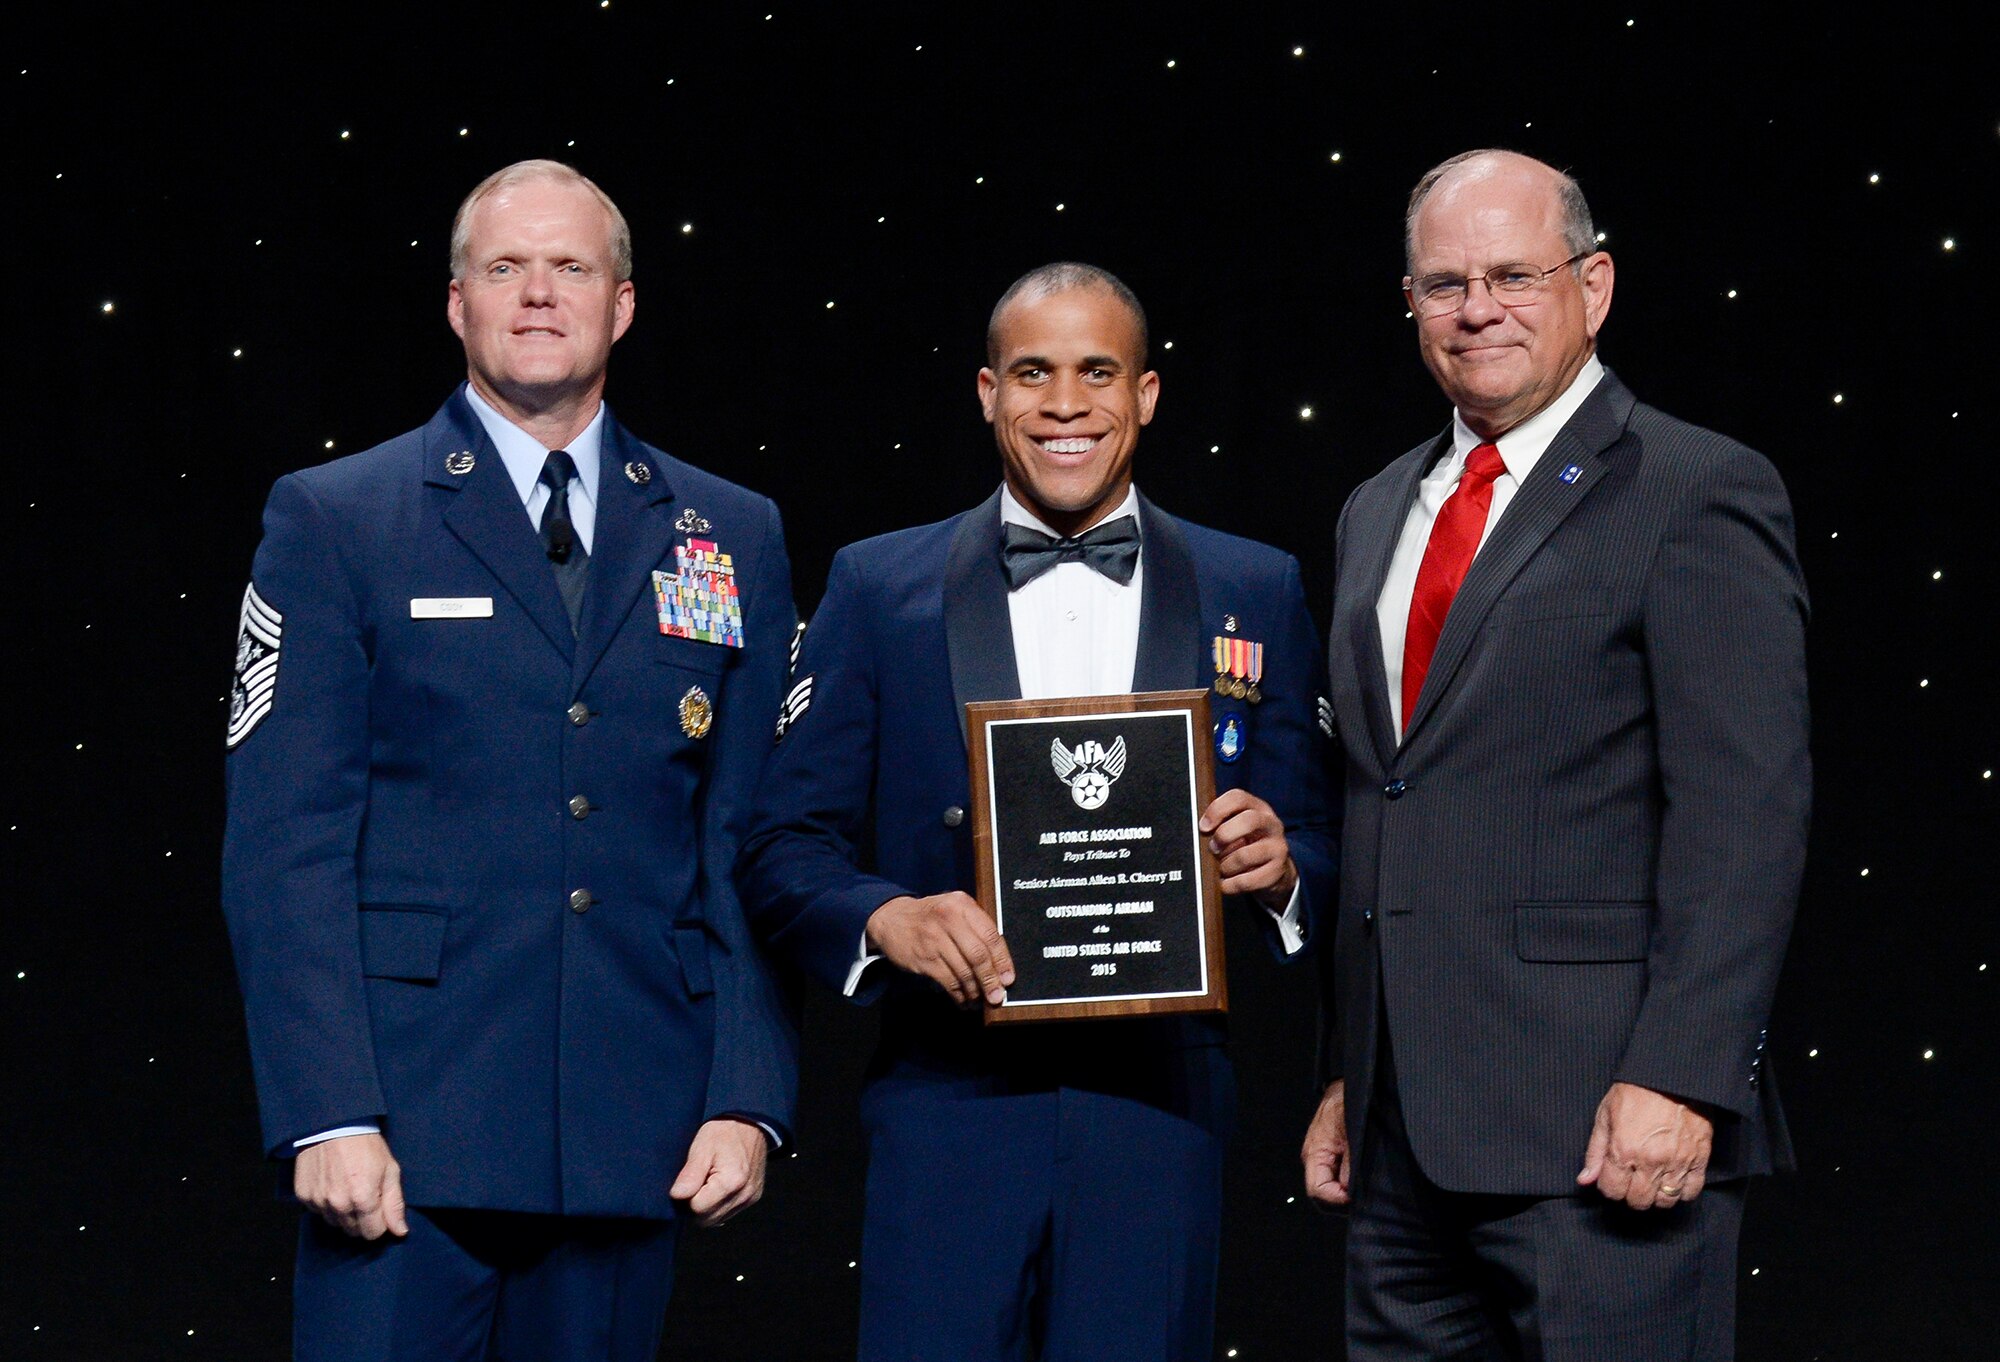 Chief Master Sergeant of the Air Force James Cody and Air Force Association Vice Chairman of the Board Scott Van Cleef flank Senior Airman Allen Cherry at an award ceremony during which Cherry is officially honored as a member of the 12 Outstanding Airmen of the Year, National Harbor, Md, September 14, 2015. (Air Force photo Andy Morataya)